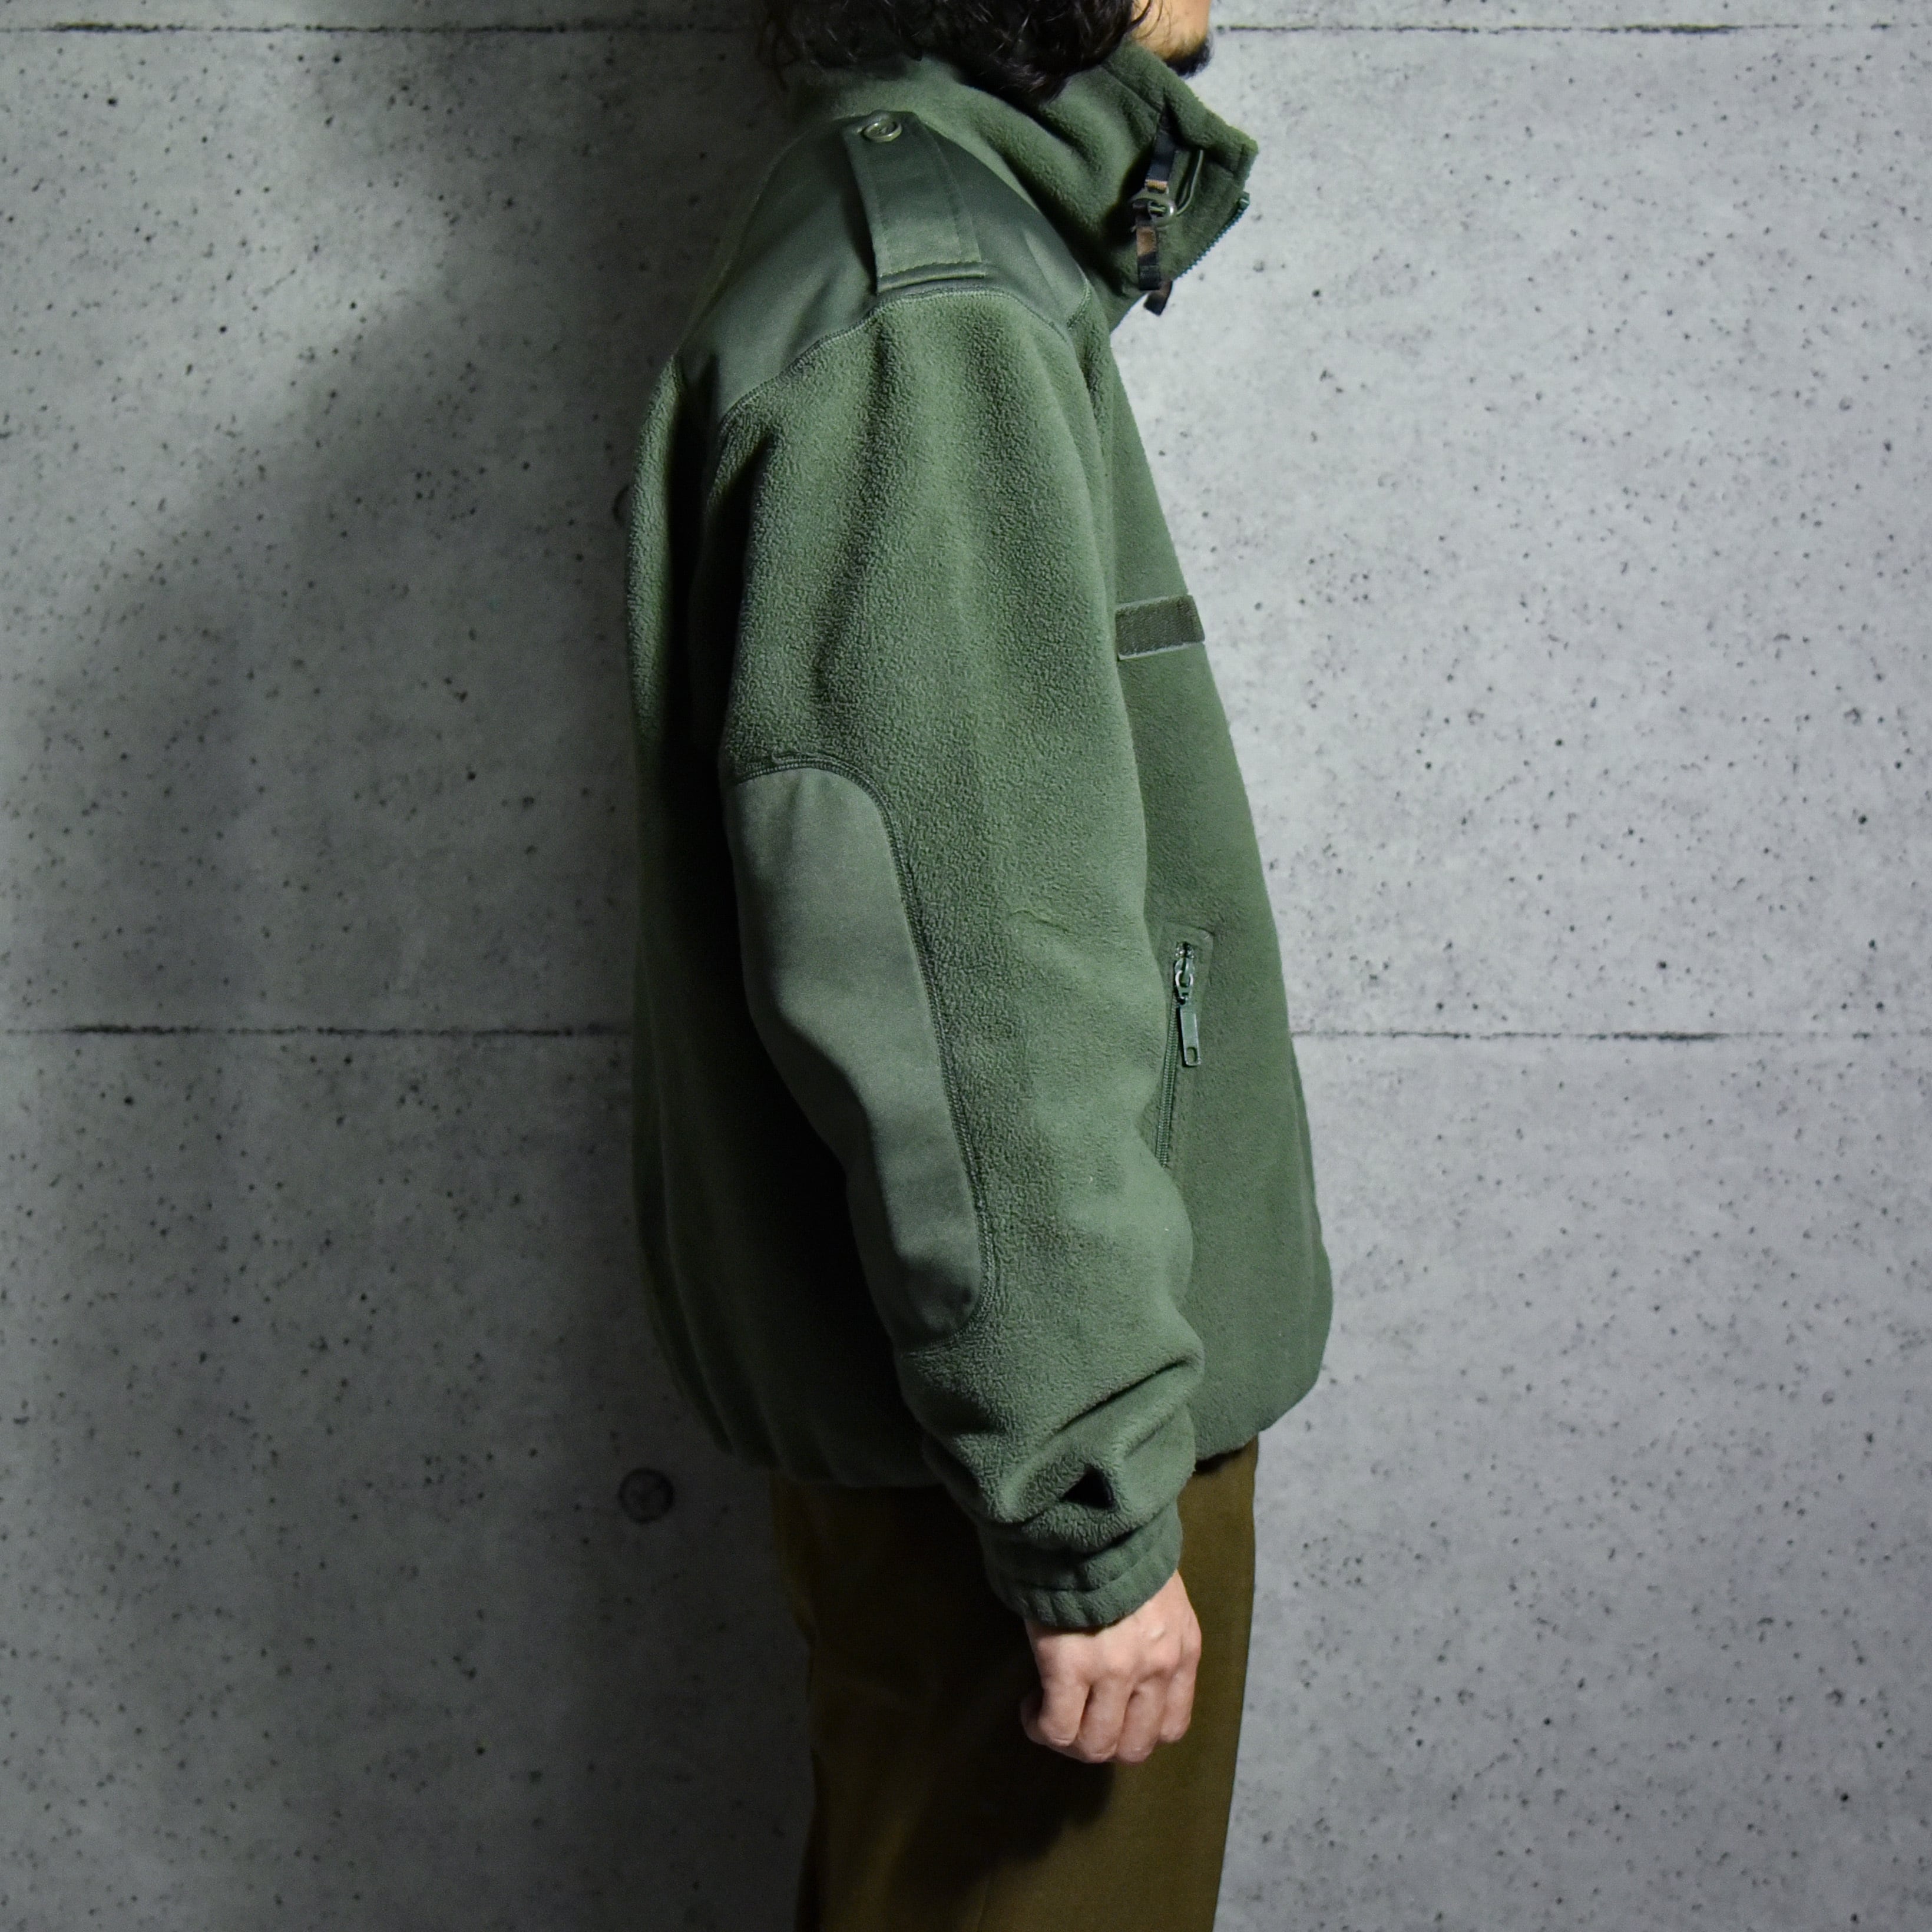 French Army Cold Weather Fleece Jacket フランス軍 コールドウェザー